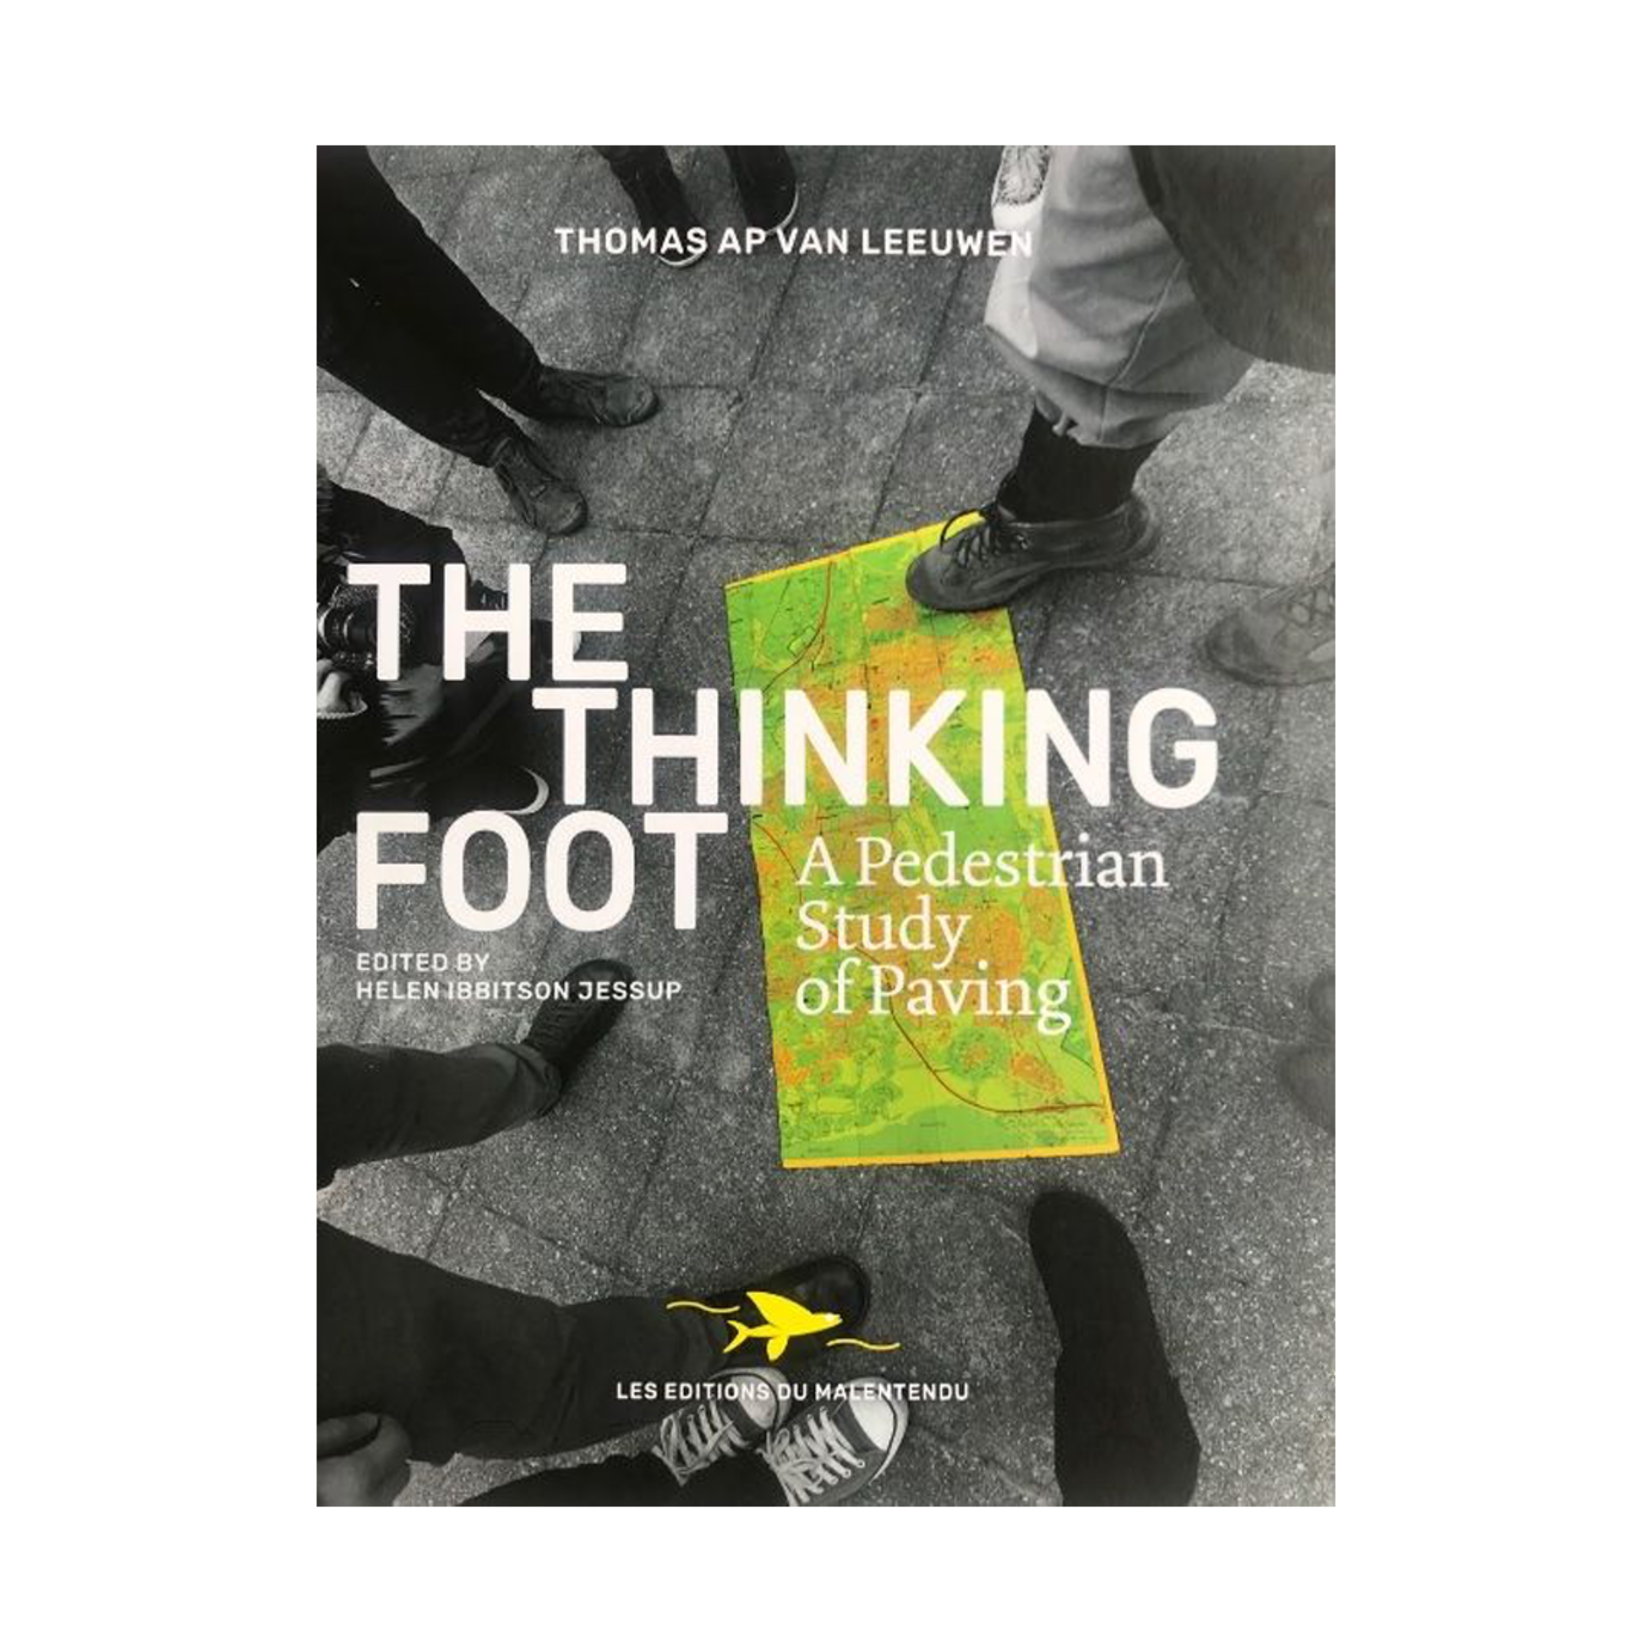 The Thinking Foot – A Pedestrian Study of Paving